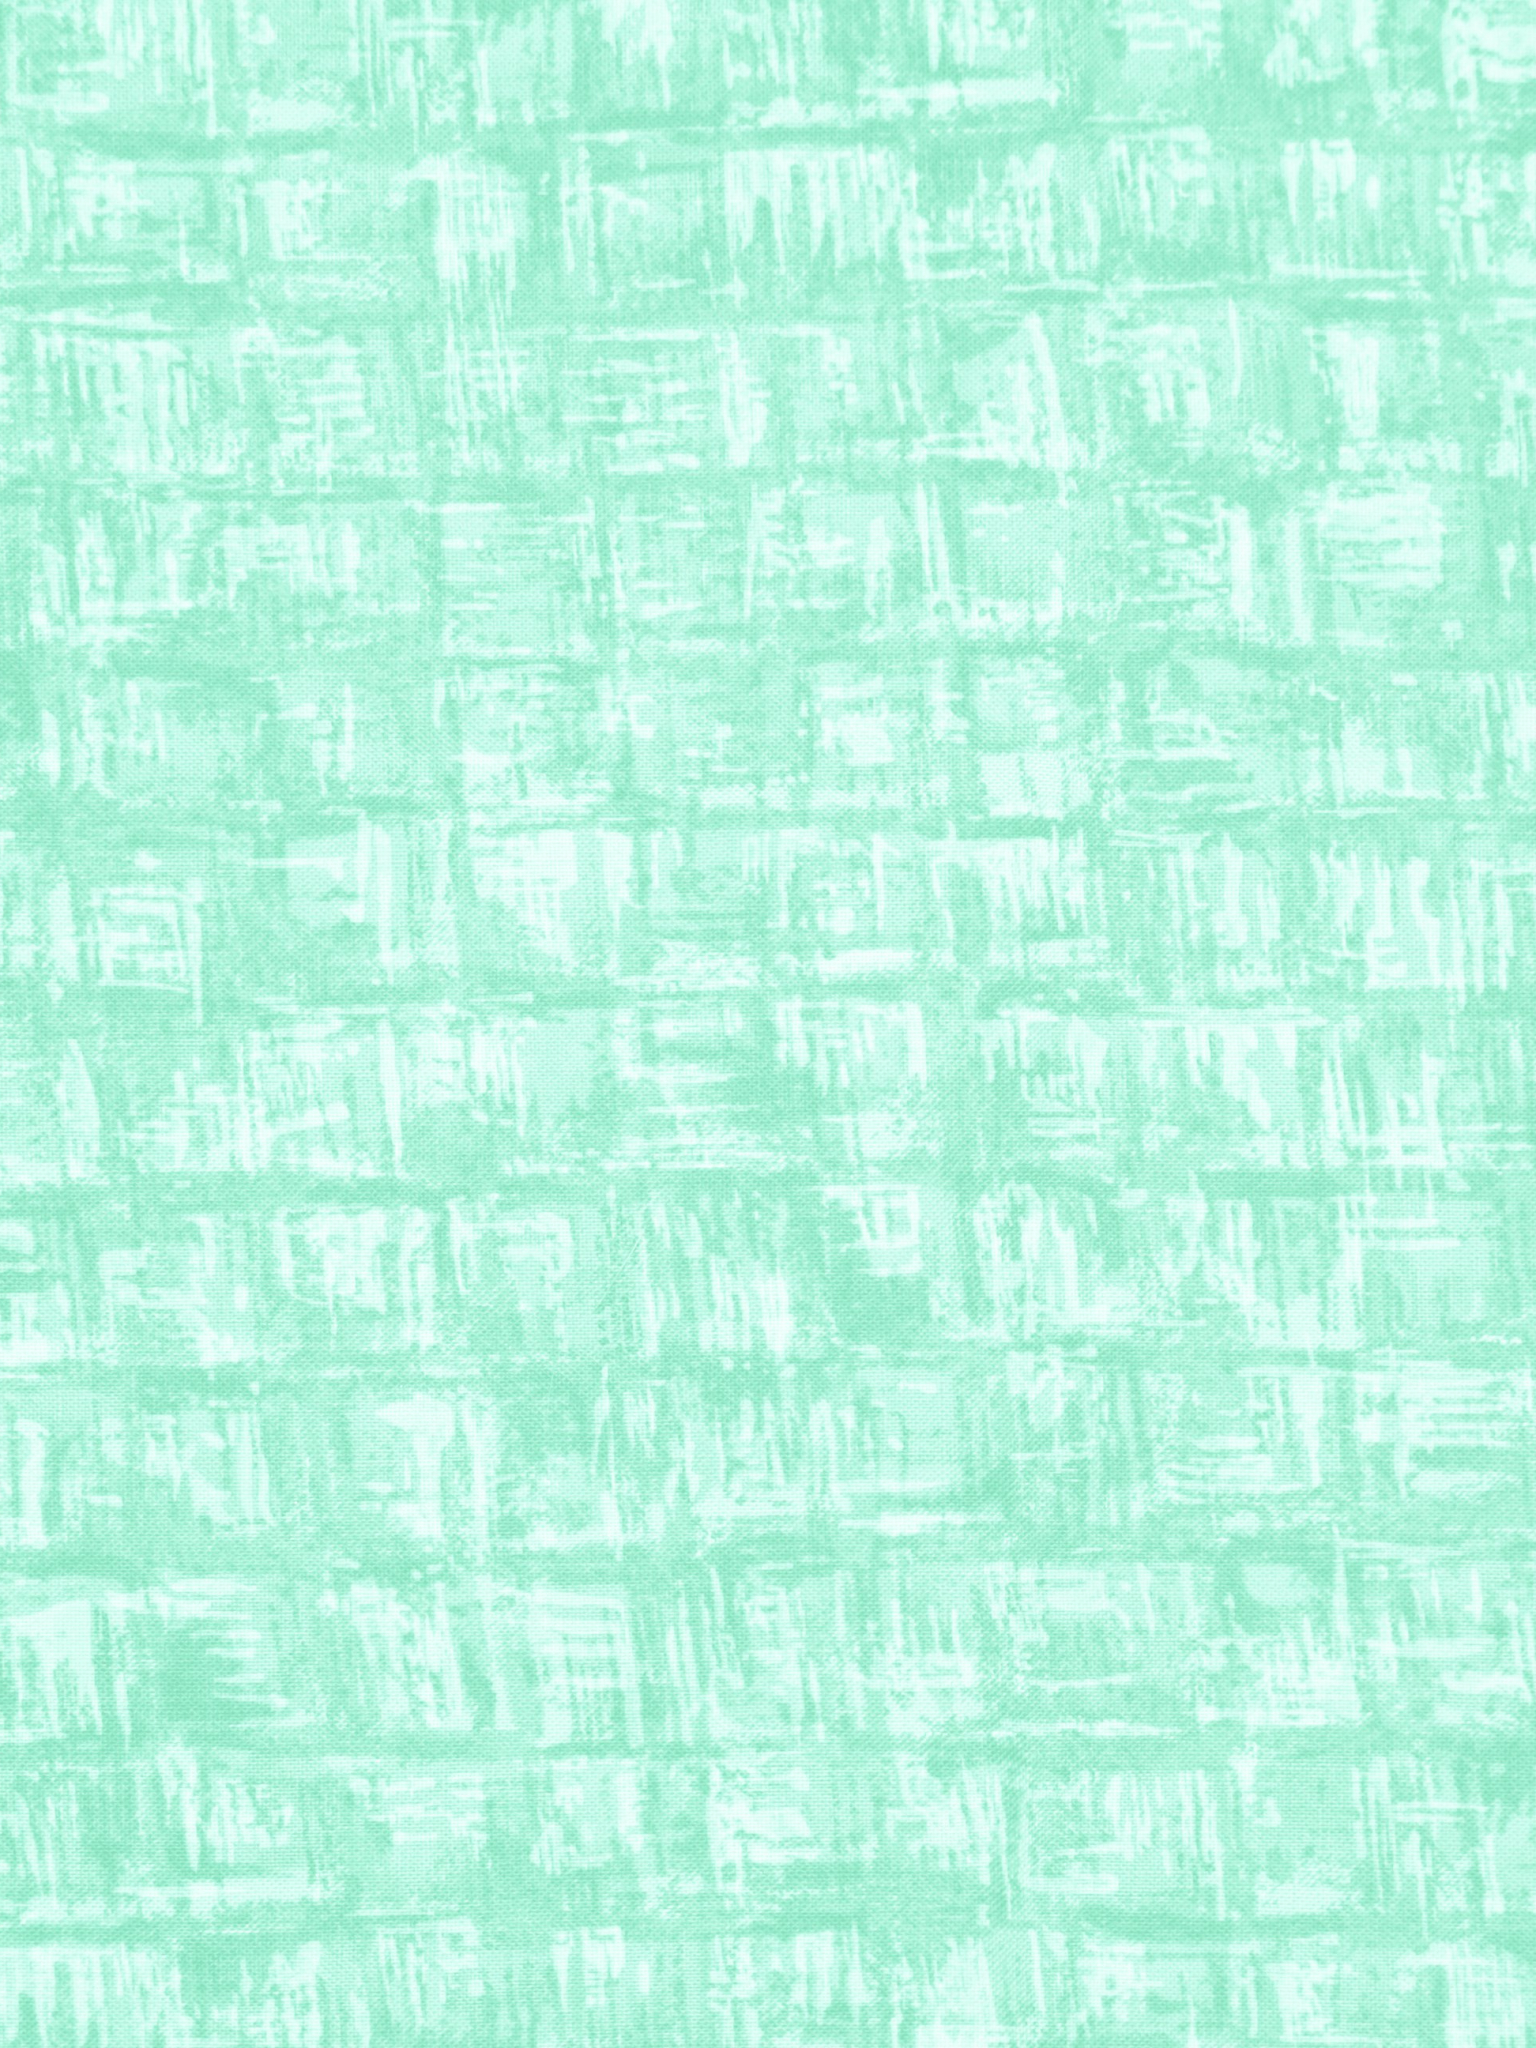 Free download Mint Green Abstract Squares Fabric Texture Picture Photograph [3888x2592] for your Desktop, Mobile & Tablet. Explore Mint Colored Wallpaper. Mint Green Chevron Wallpaper, Mint and Gold Wallpaper